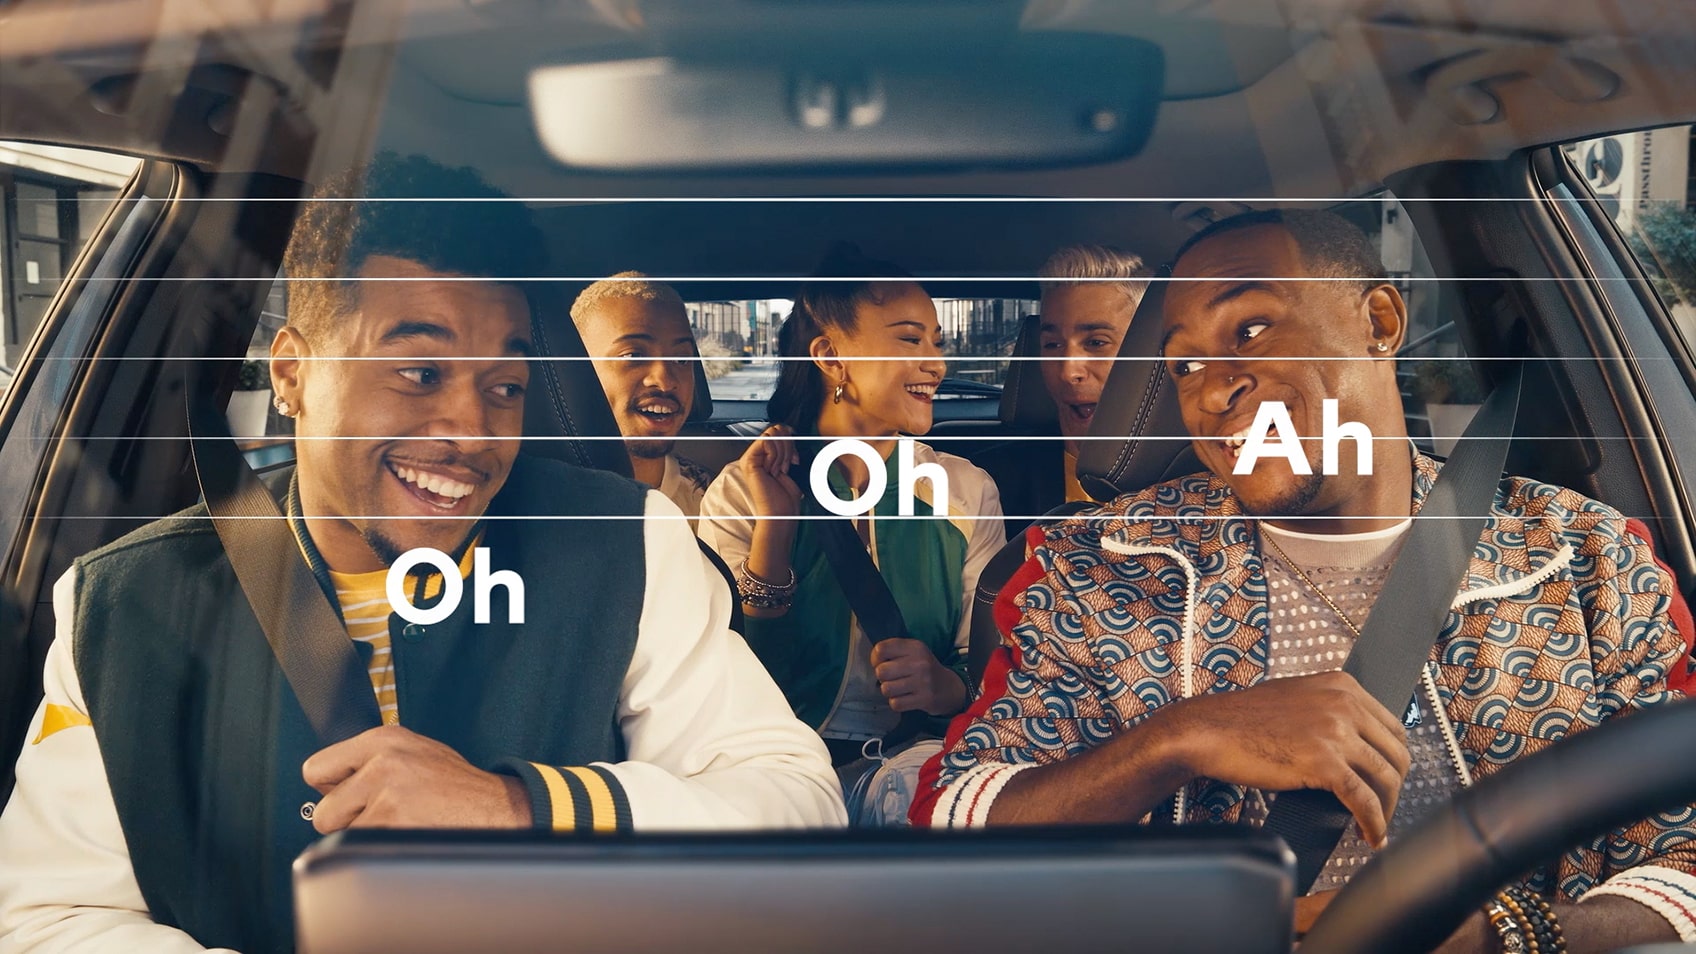 An image of friends inside a vehicle singing along to music with a super of the words “Oh Oh Ah” displayed like musical notes.